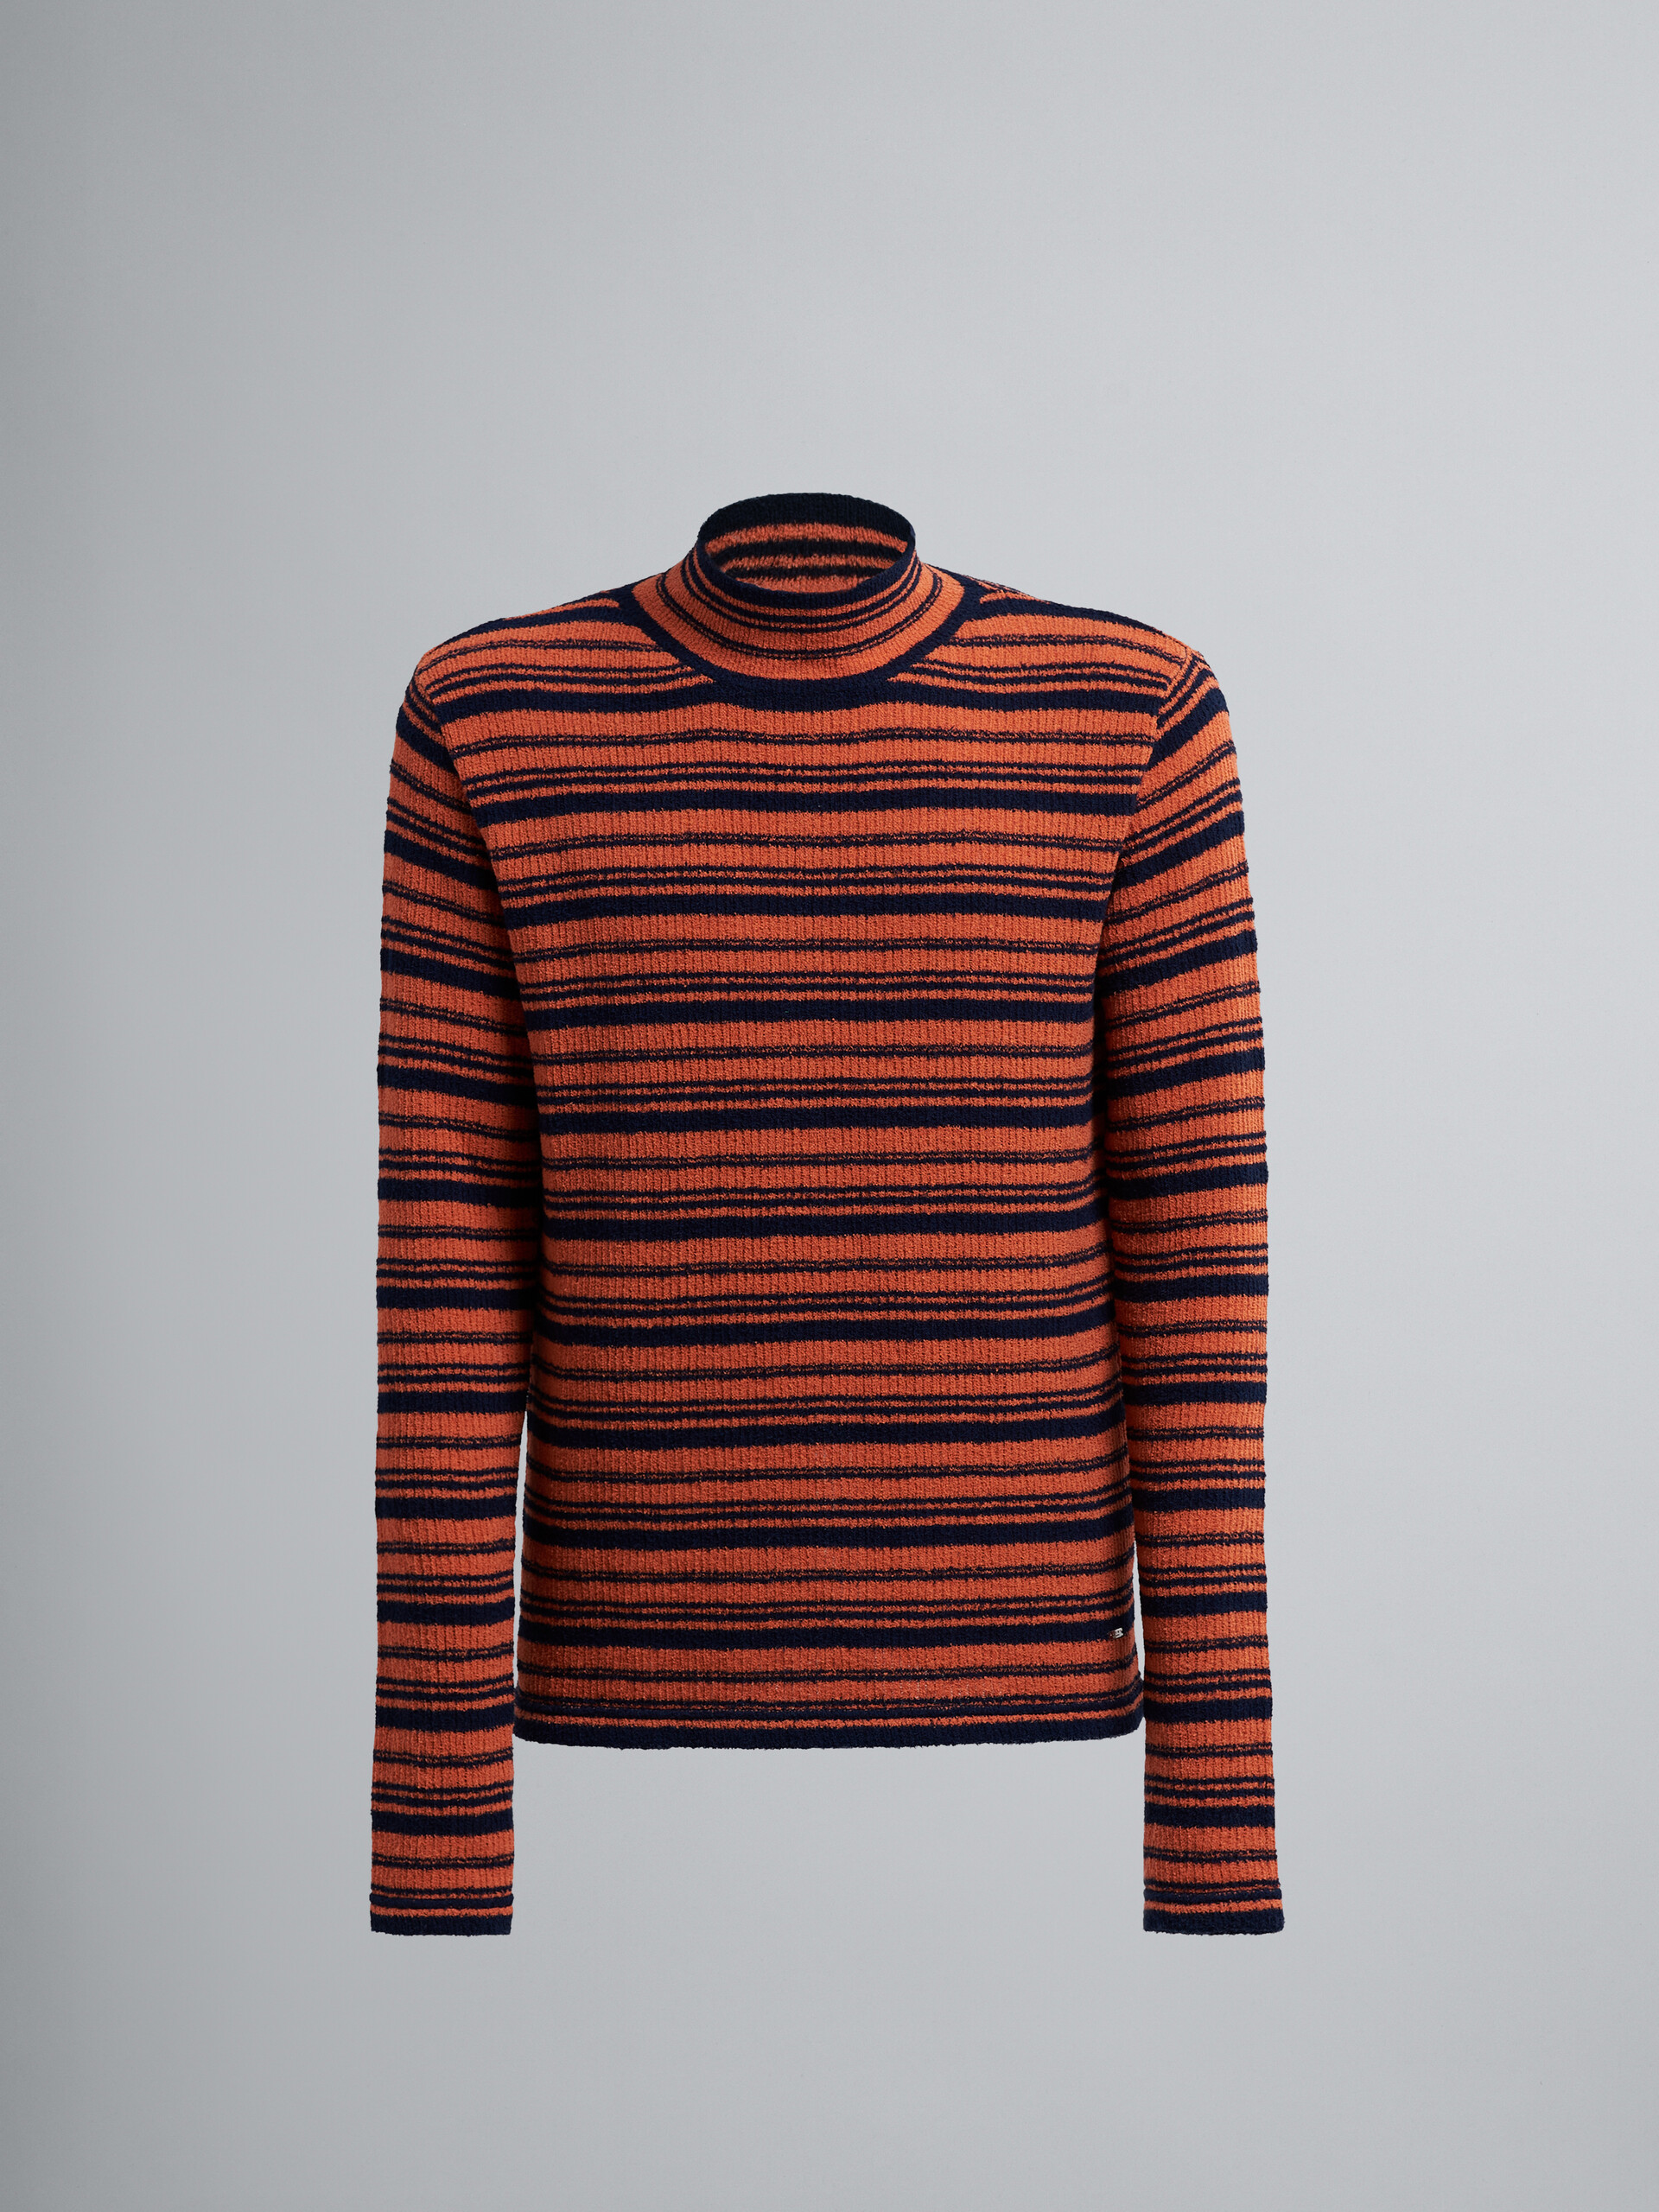 Terry-cloth effect striped cotton blend sweater - Pullovers - Image 1